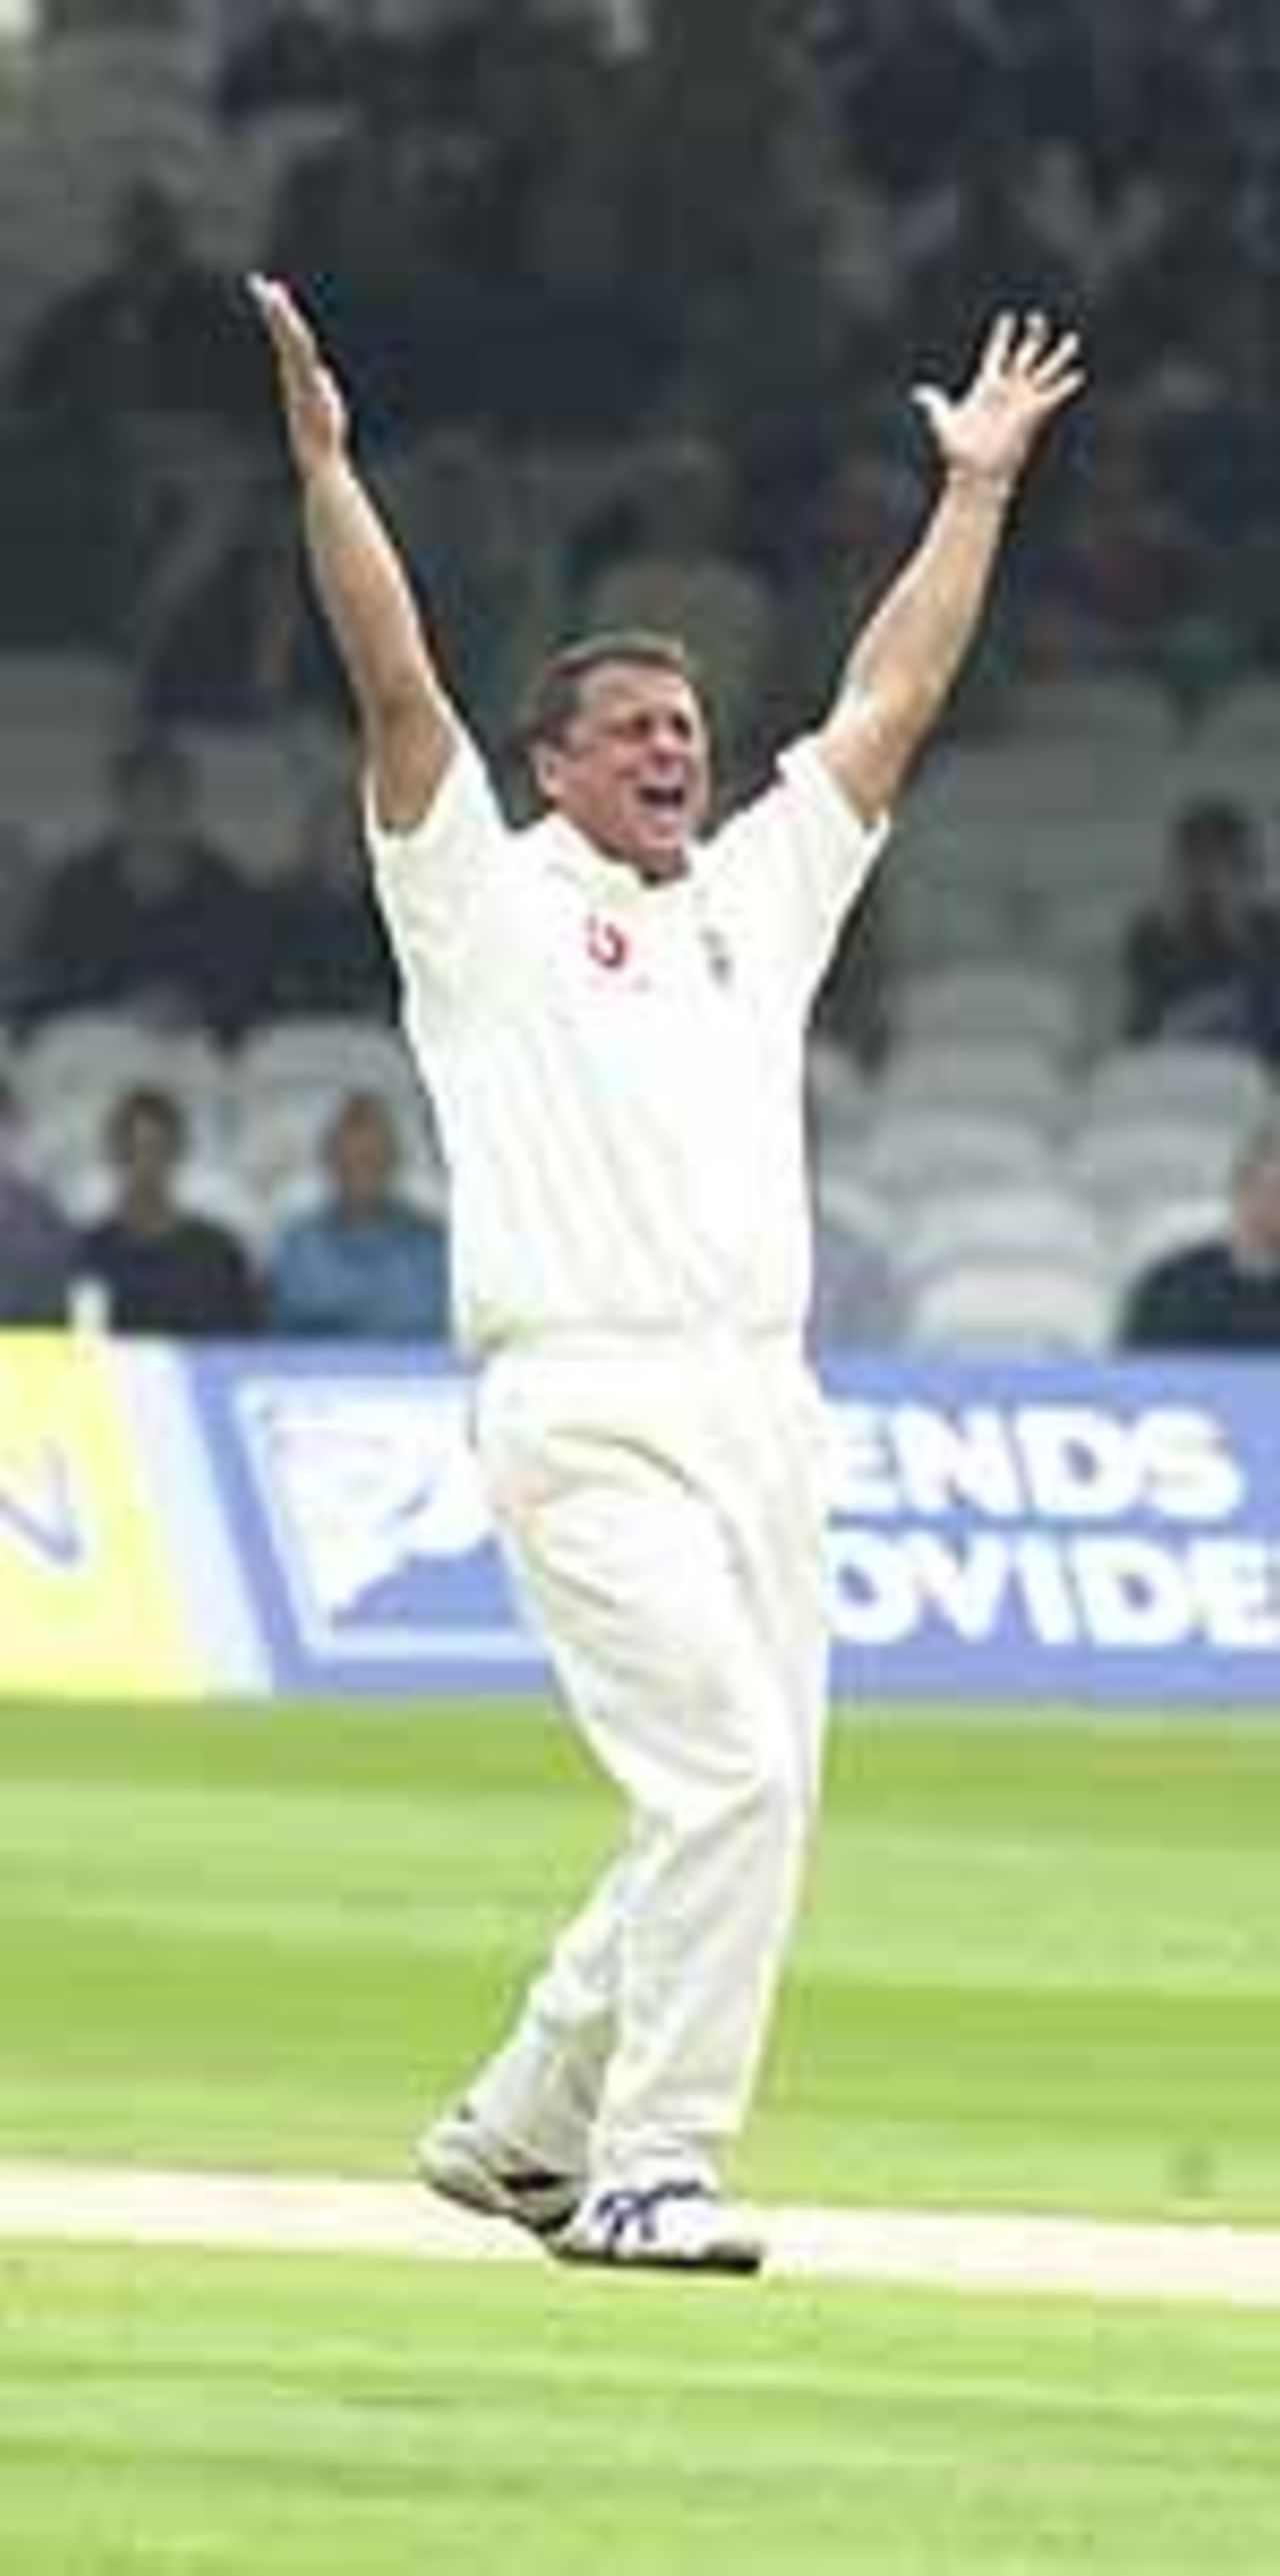 Gough celebrates Yousuf Youhana's dismissal, 4th day, 1st Test, England v Pakistan at Lords, May 20 2001